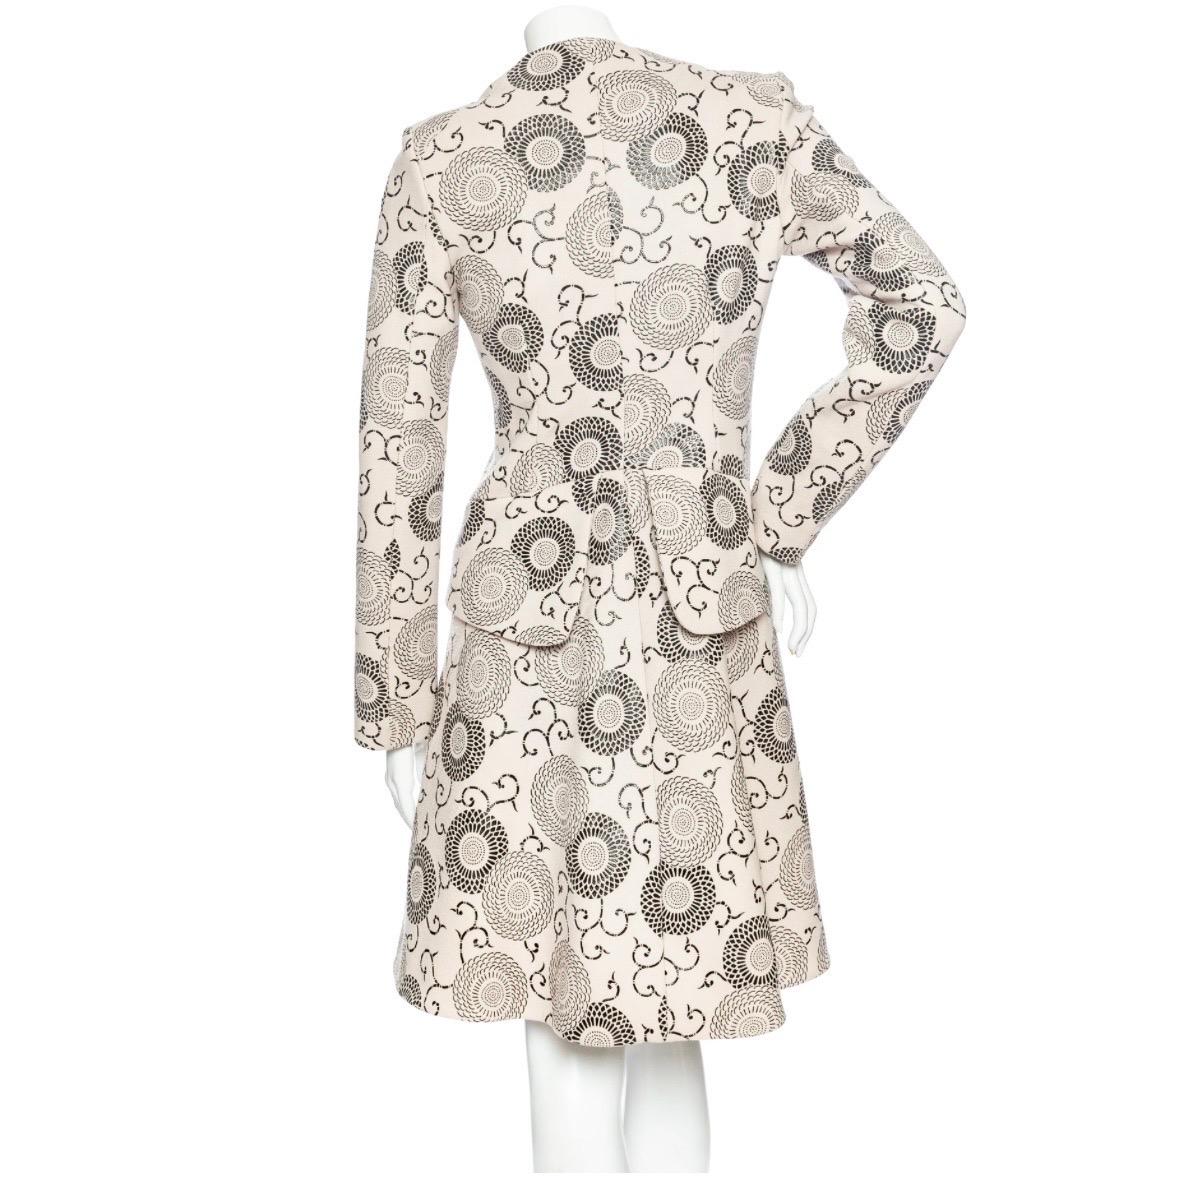 Etro Cream and Black Floral Print Swing Coat

Fall 2012 Collection
Cream, Beige/Black
Abstract floral print
Collarless round neckline
Long sleeves
Front flap pockets
Concealed front button closure
Back flaps at waist
Striped lining
Raised texture on